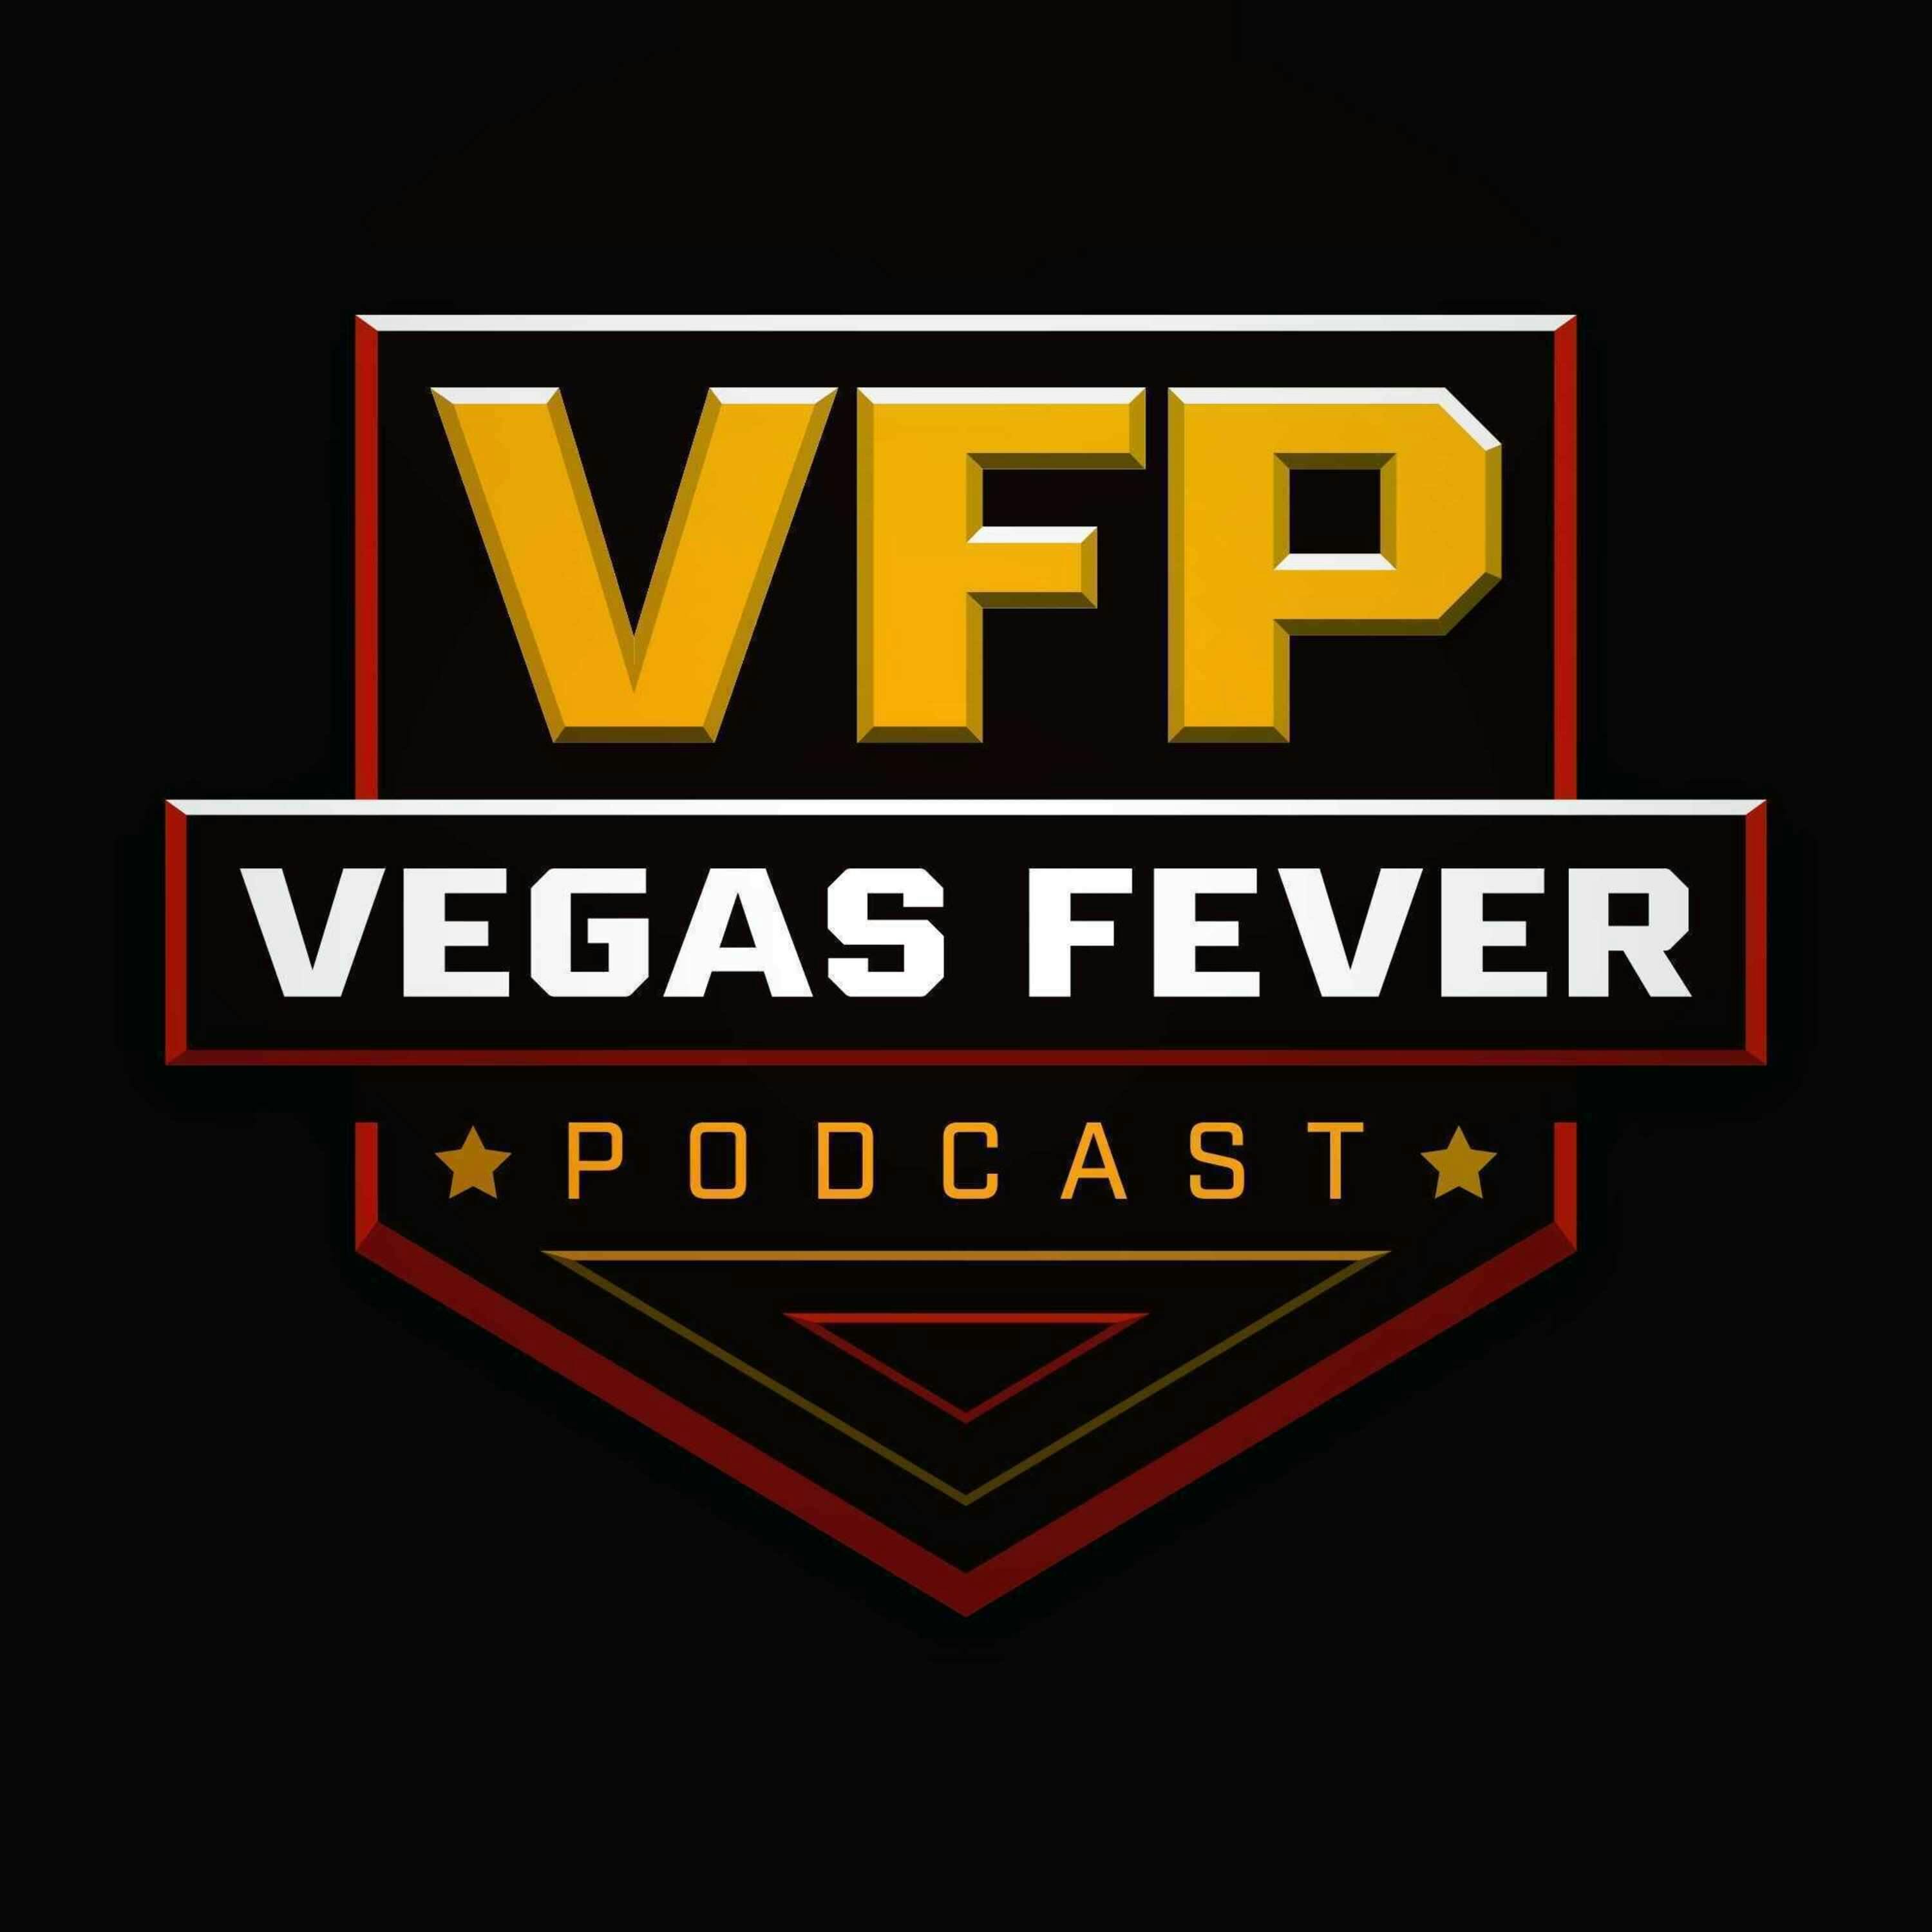 We discuss who laid the foundation in Vegas' sports history & how the VGK did during reunion week.